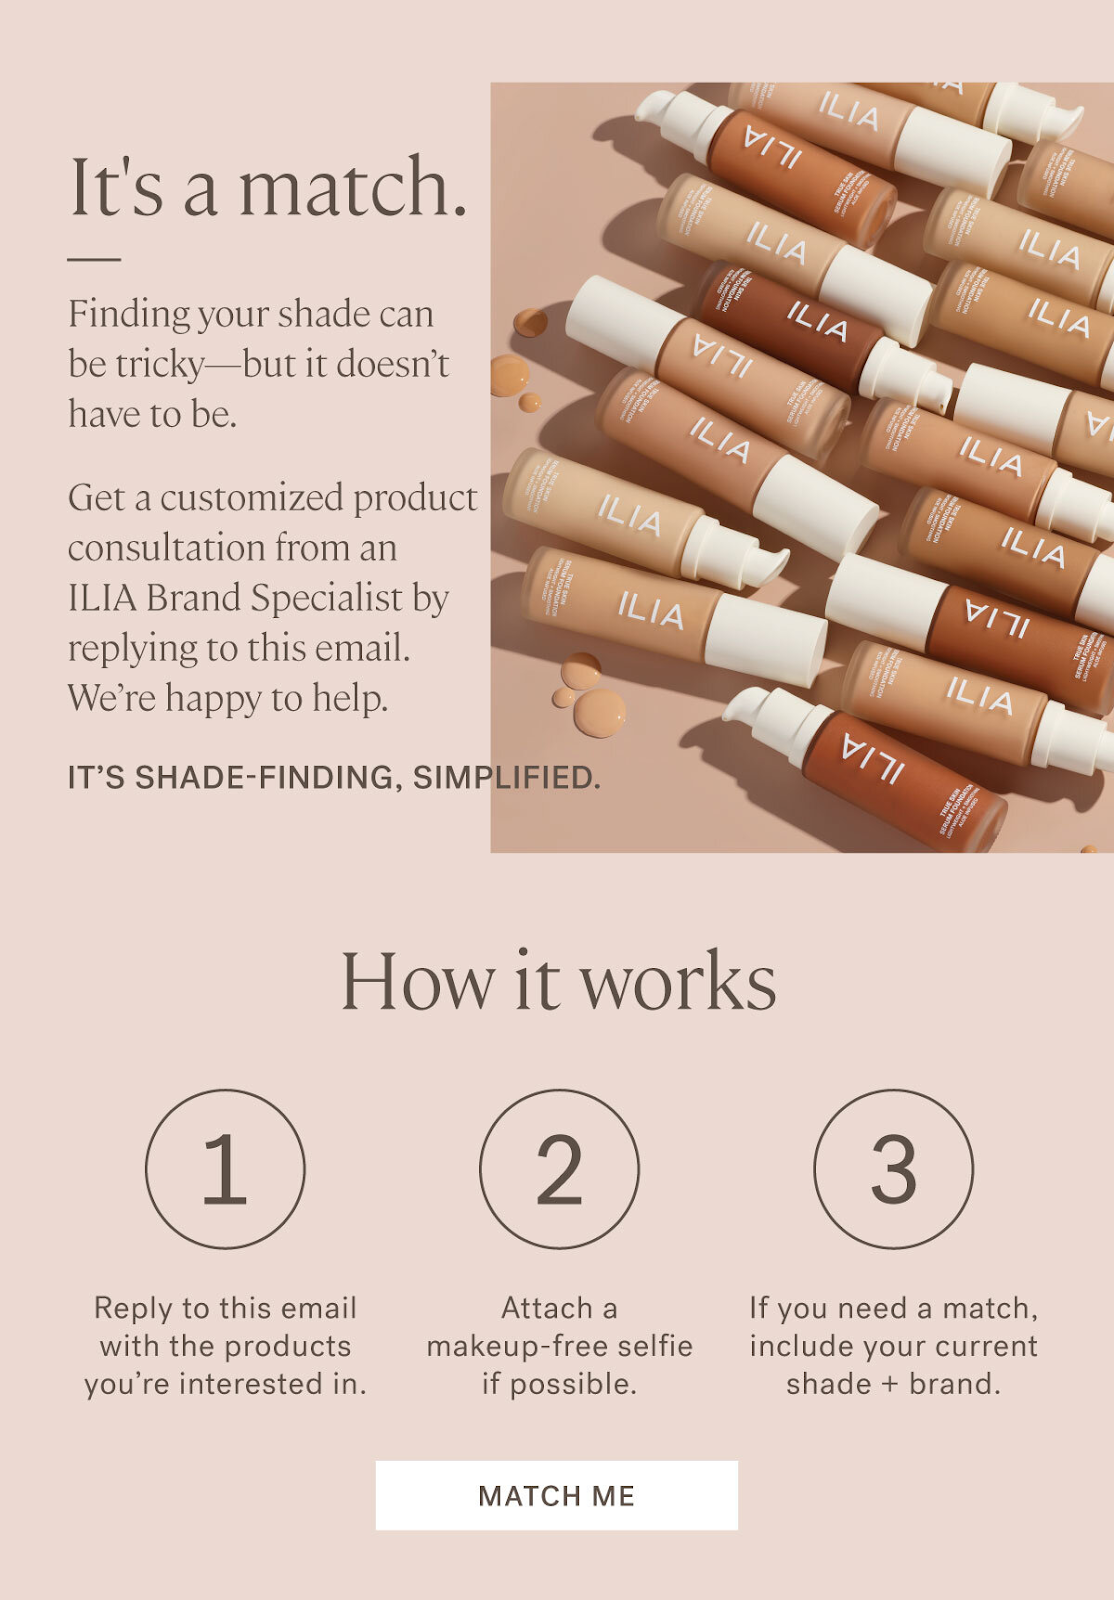 Email from ILIA Beauty telling customers how its customized product consultations work alongside an image of ILIA foundations in different shades.